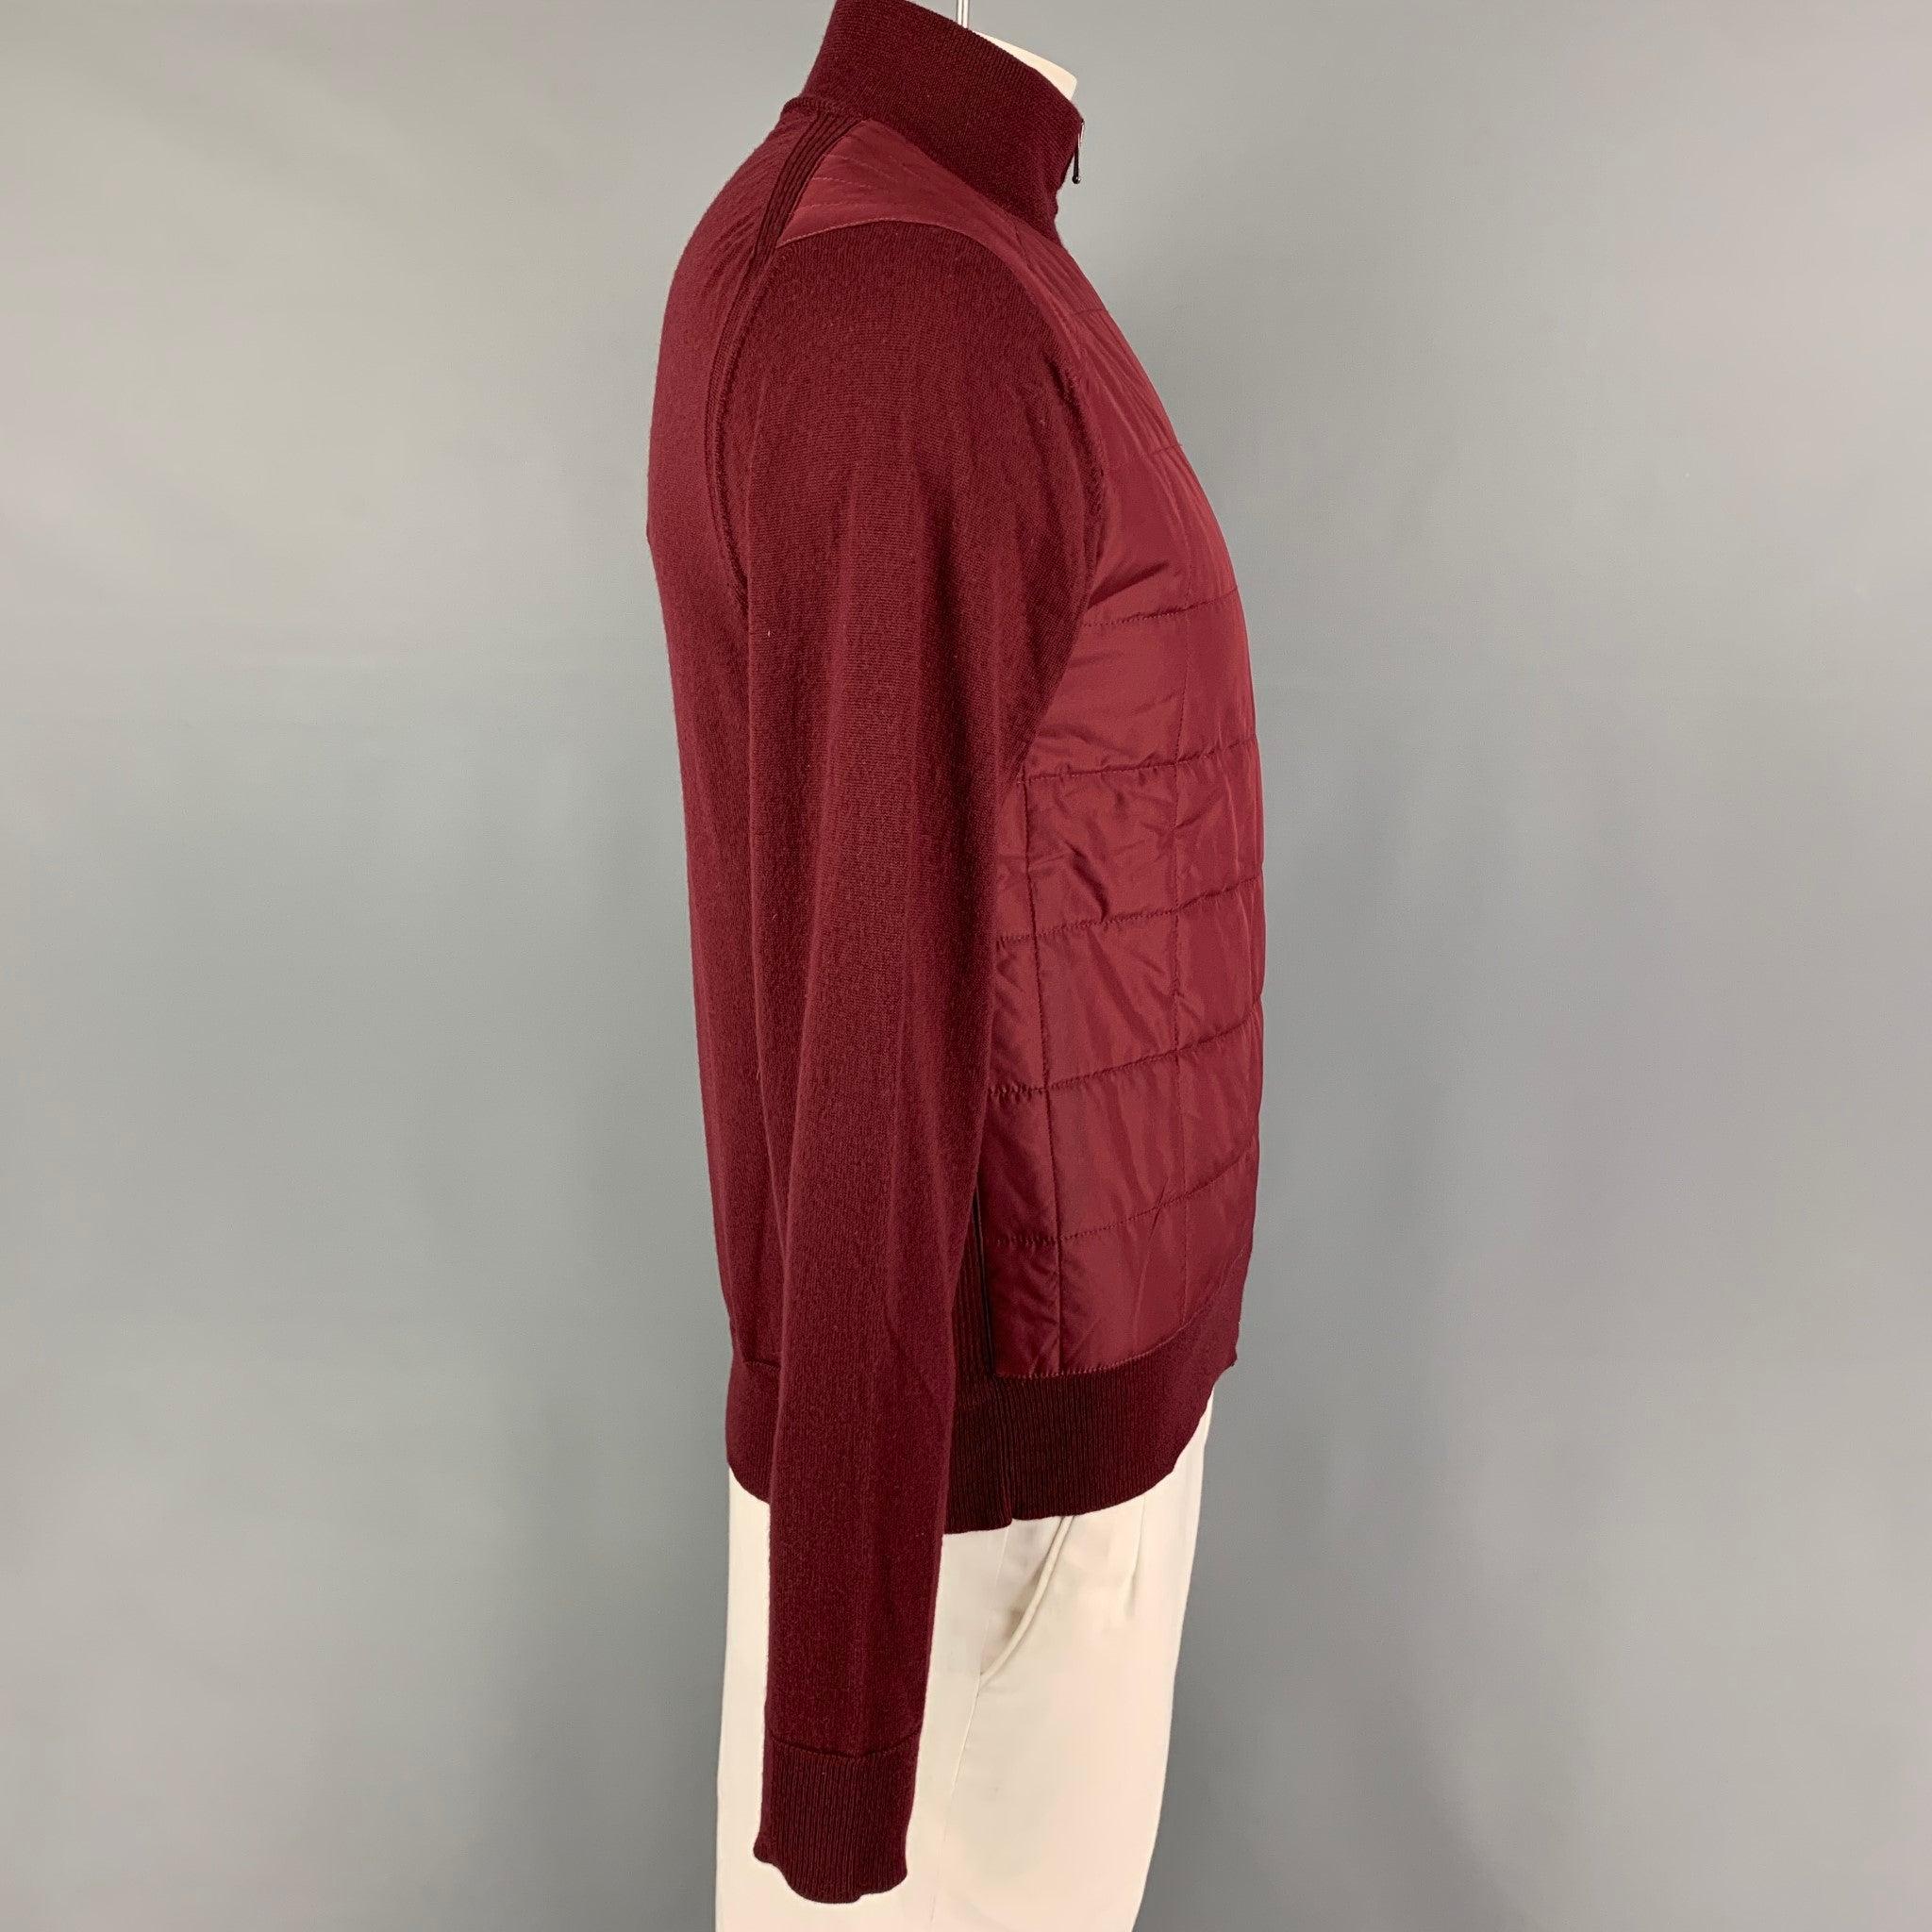 BELSTAFF jacket comes in a burgundy quilted wool / polyester featuring a high collar and a zip up closure.
Excellent
Pre-Owned Condition. 

Marked:   L  

Measurements: 
 
Shoulder: 18 inches Chest: 38 inches Sleeve:
27.5 inches Length: 26.5 inches